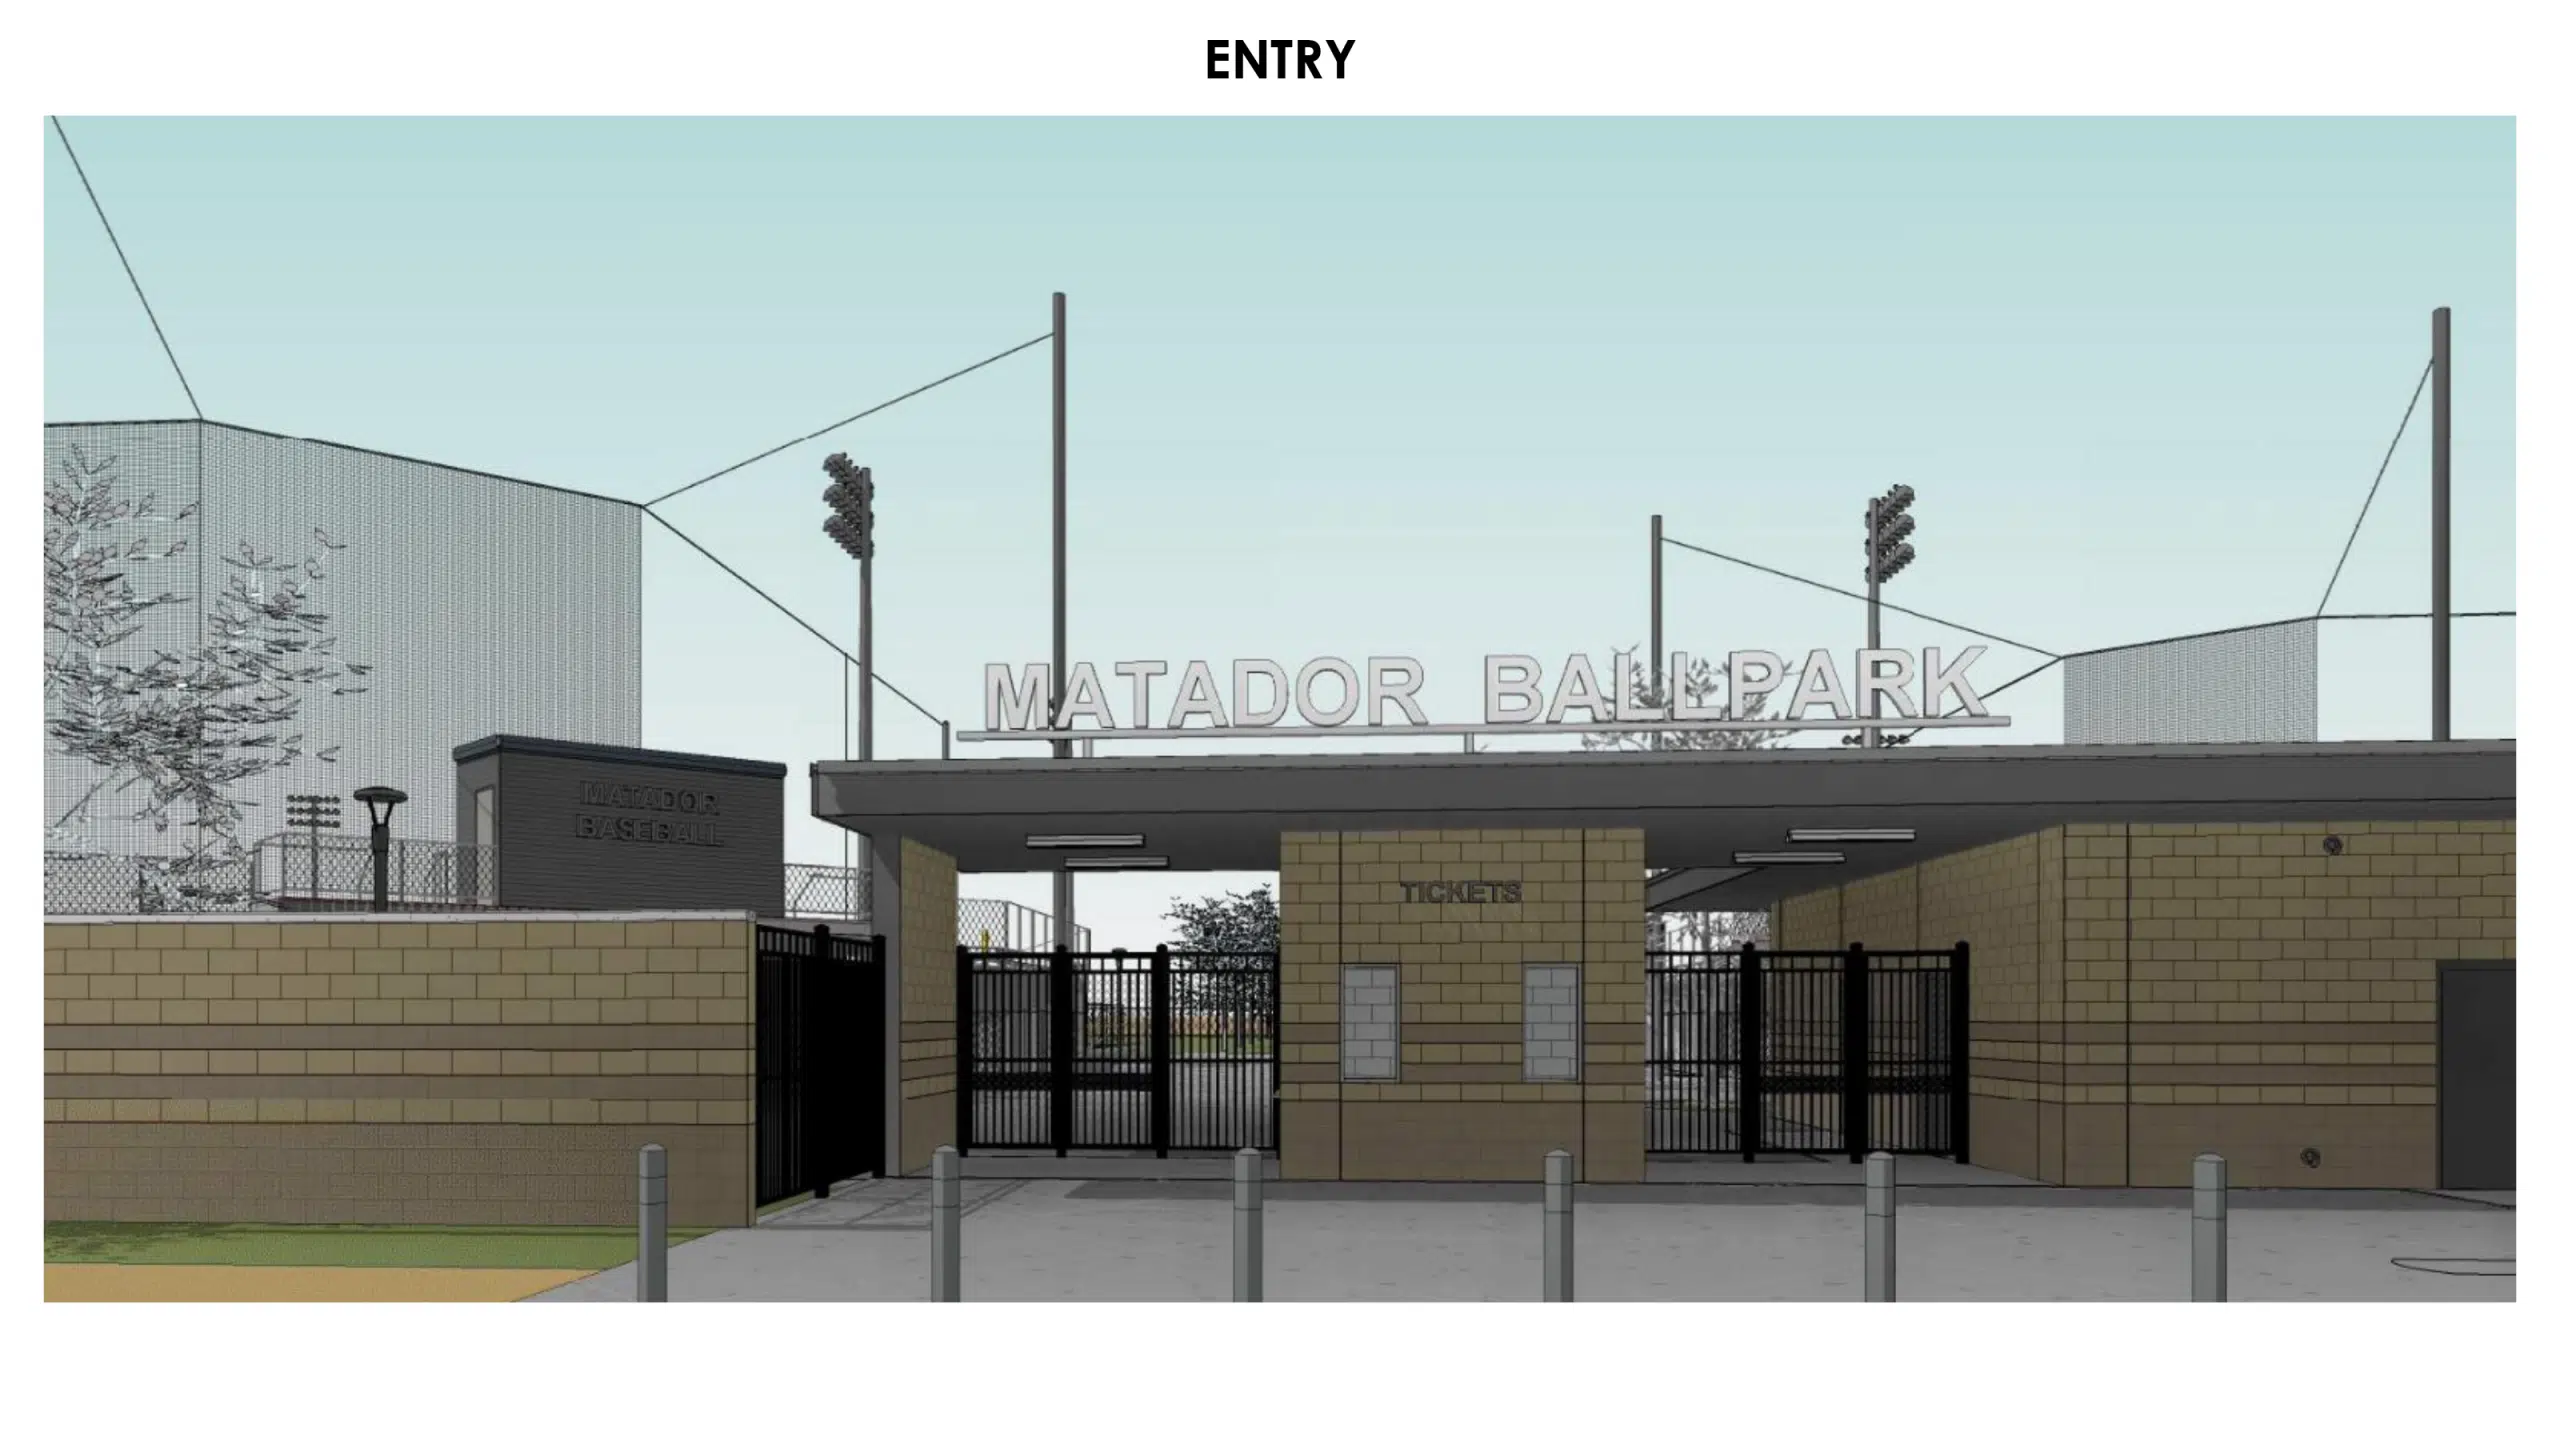 Seguin ISD's vision for a baseball, softball complex comes to fruition